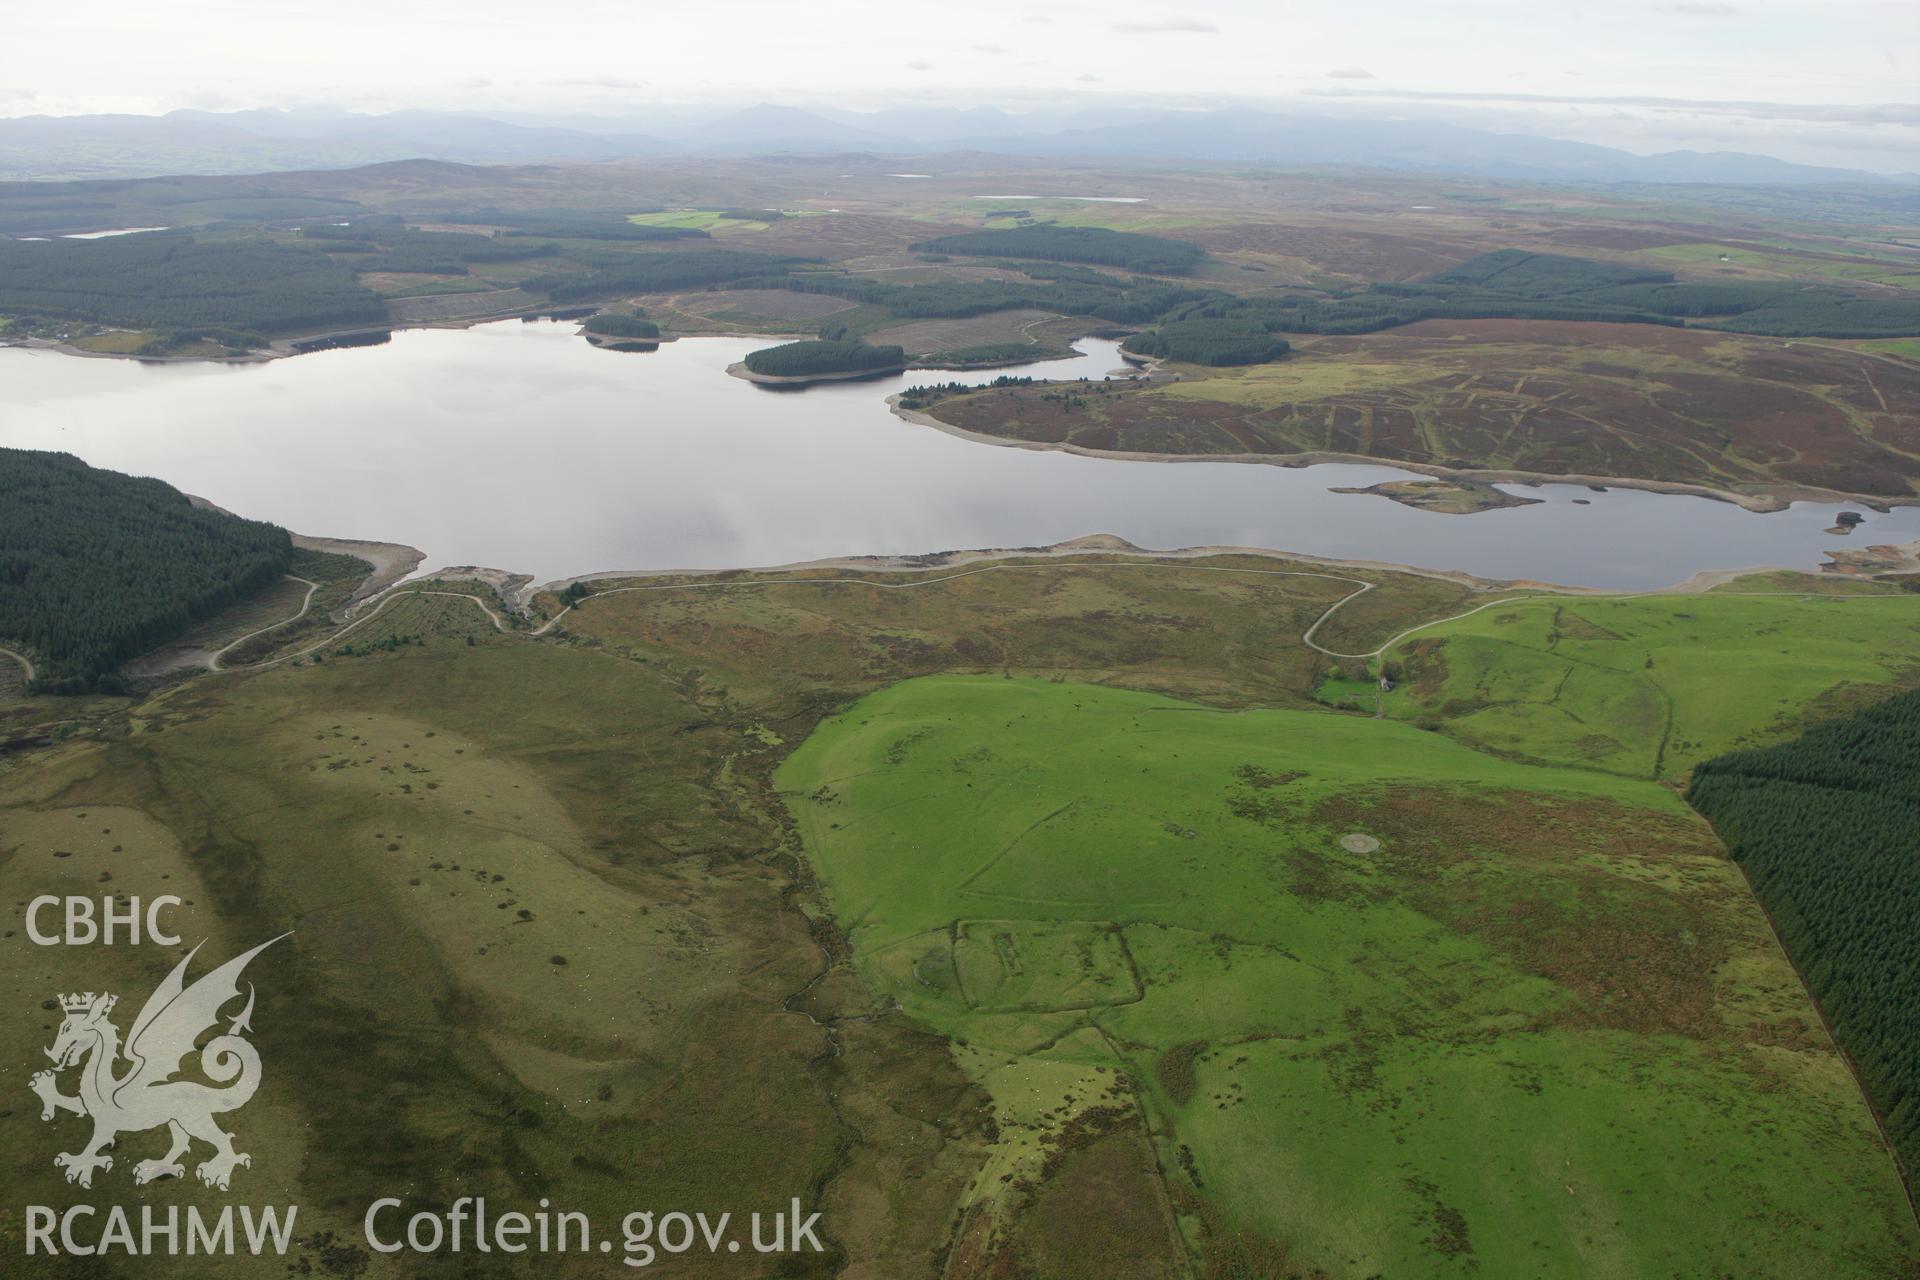 RCAHMW colour oblique aerial photograph of Hen Ddinbych showing landscape looking west towards Llyn Brenig Taken on 13 October 2009 by Toby Driver